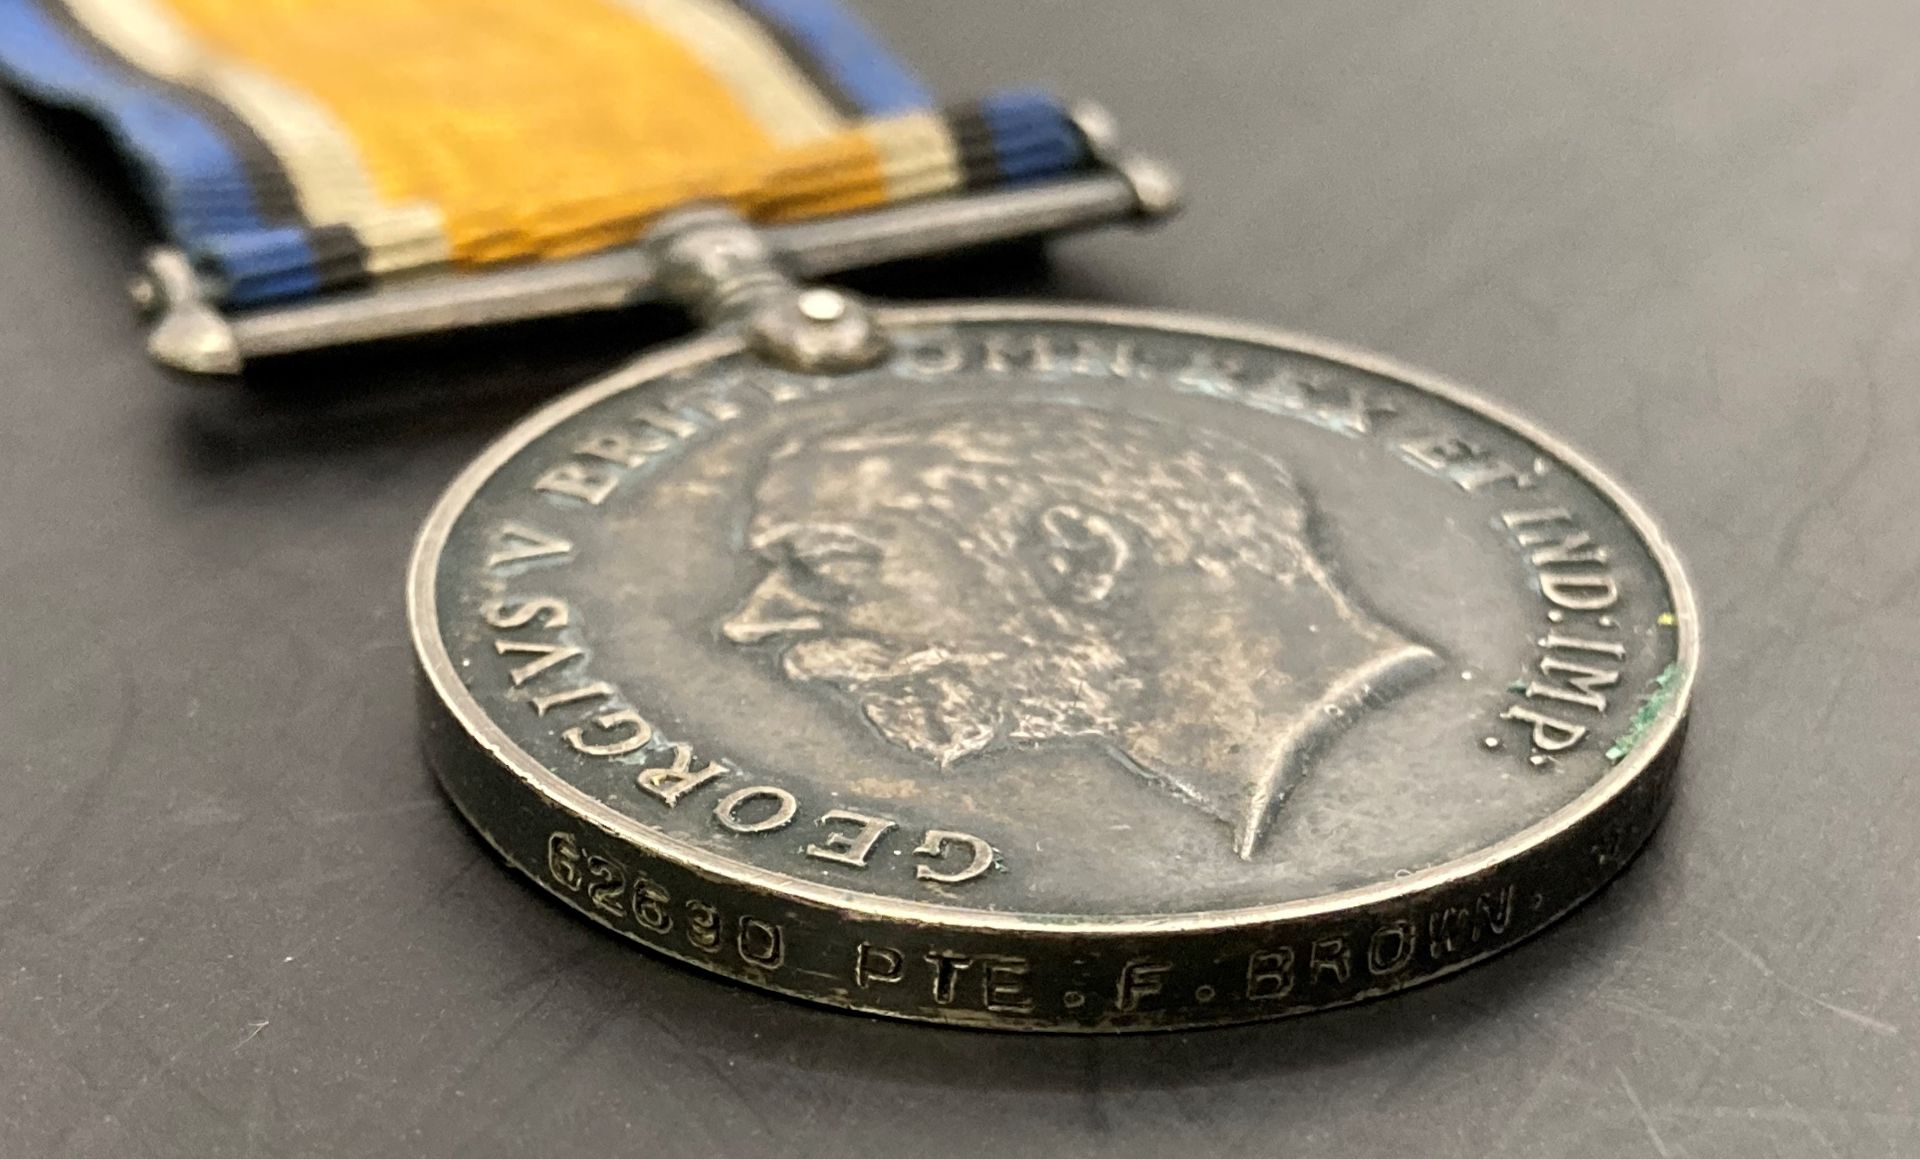 Two First World War Medals - 1914-1918 War Medal with ribbon and the Victory Medal 1914-1919 - Image 3 of 3